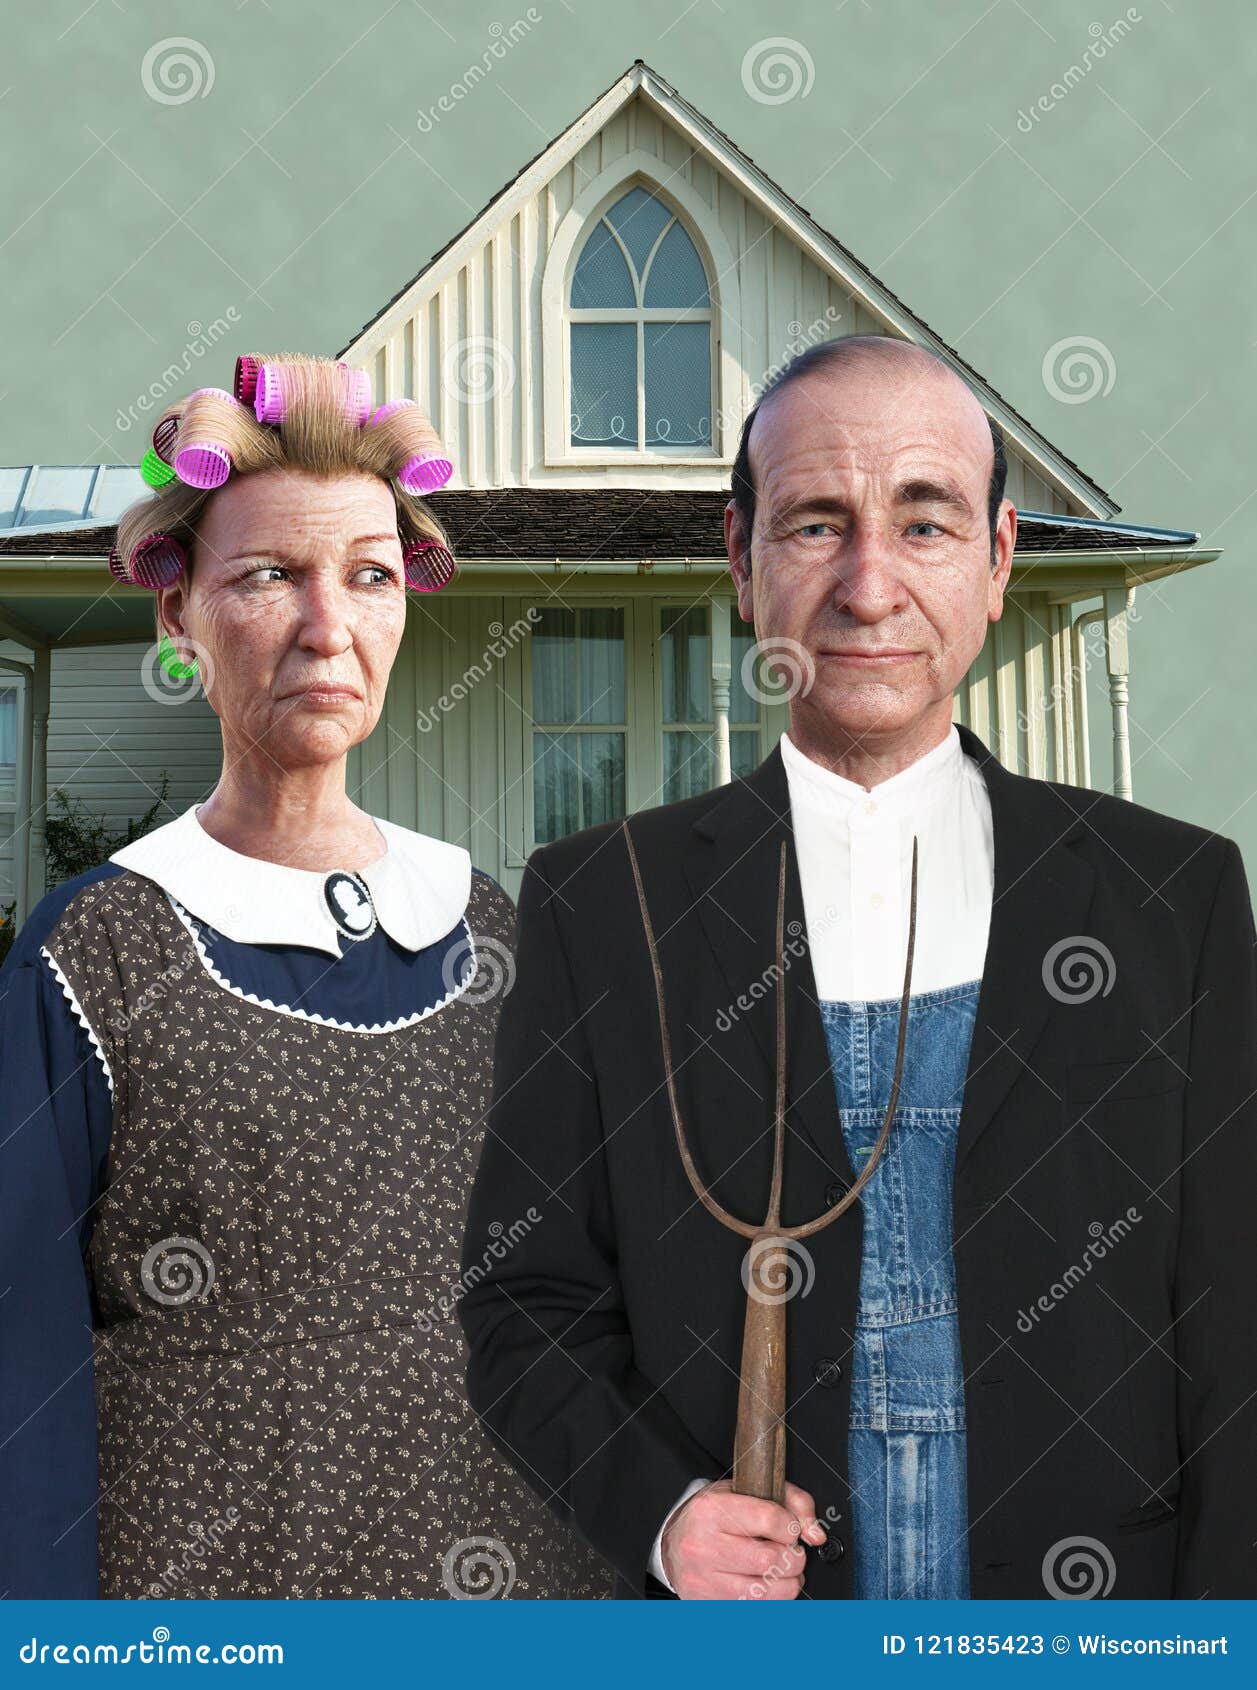 funny american gothic painting spoof